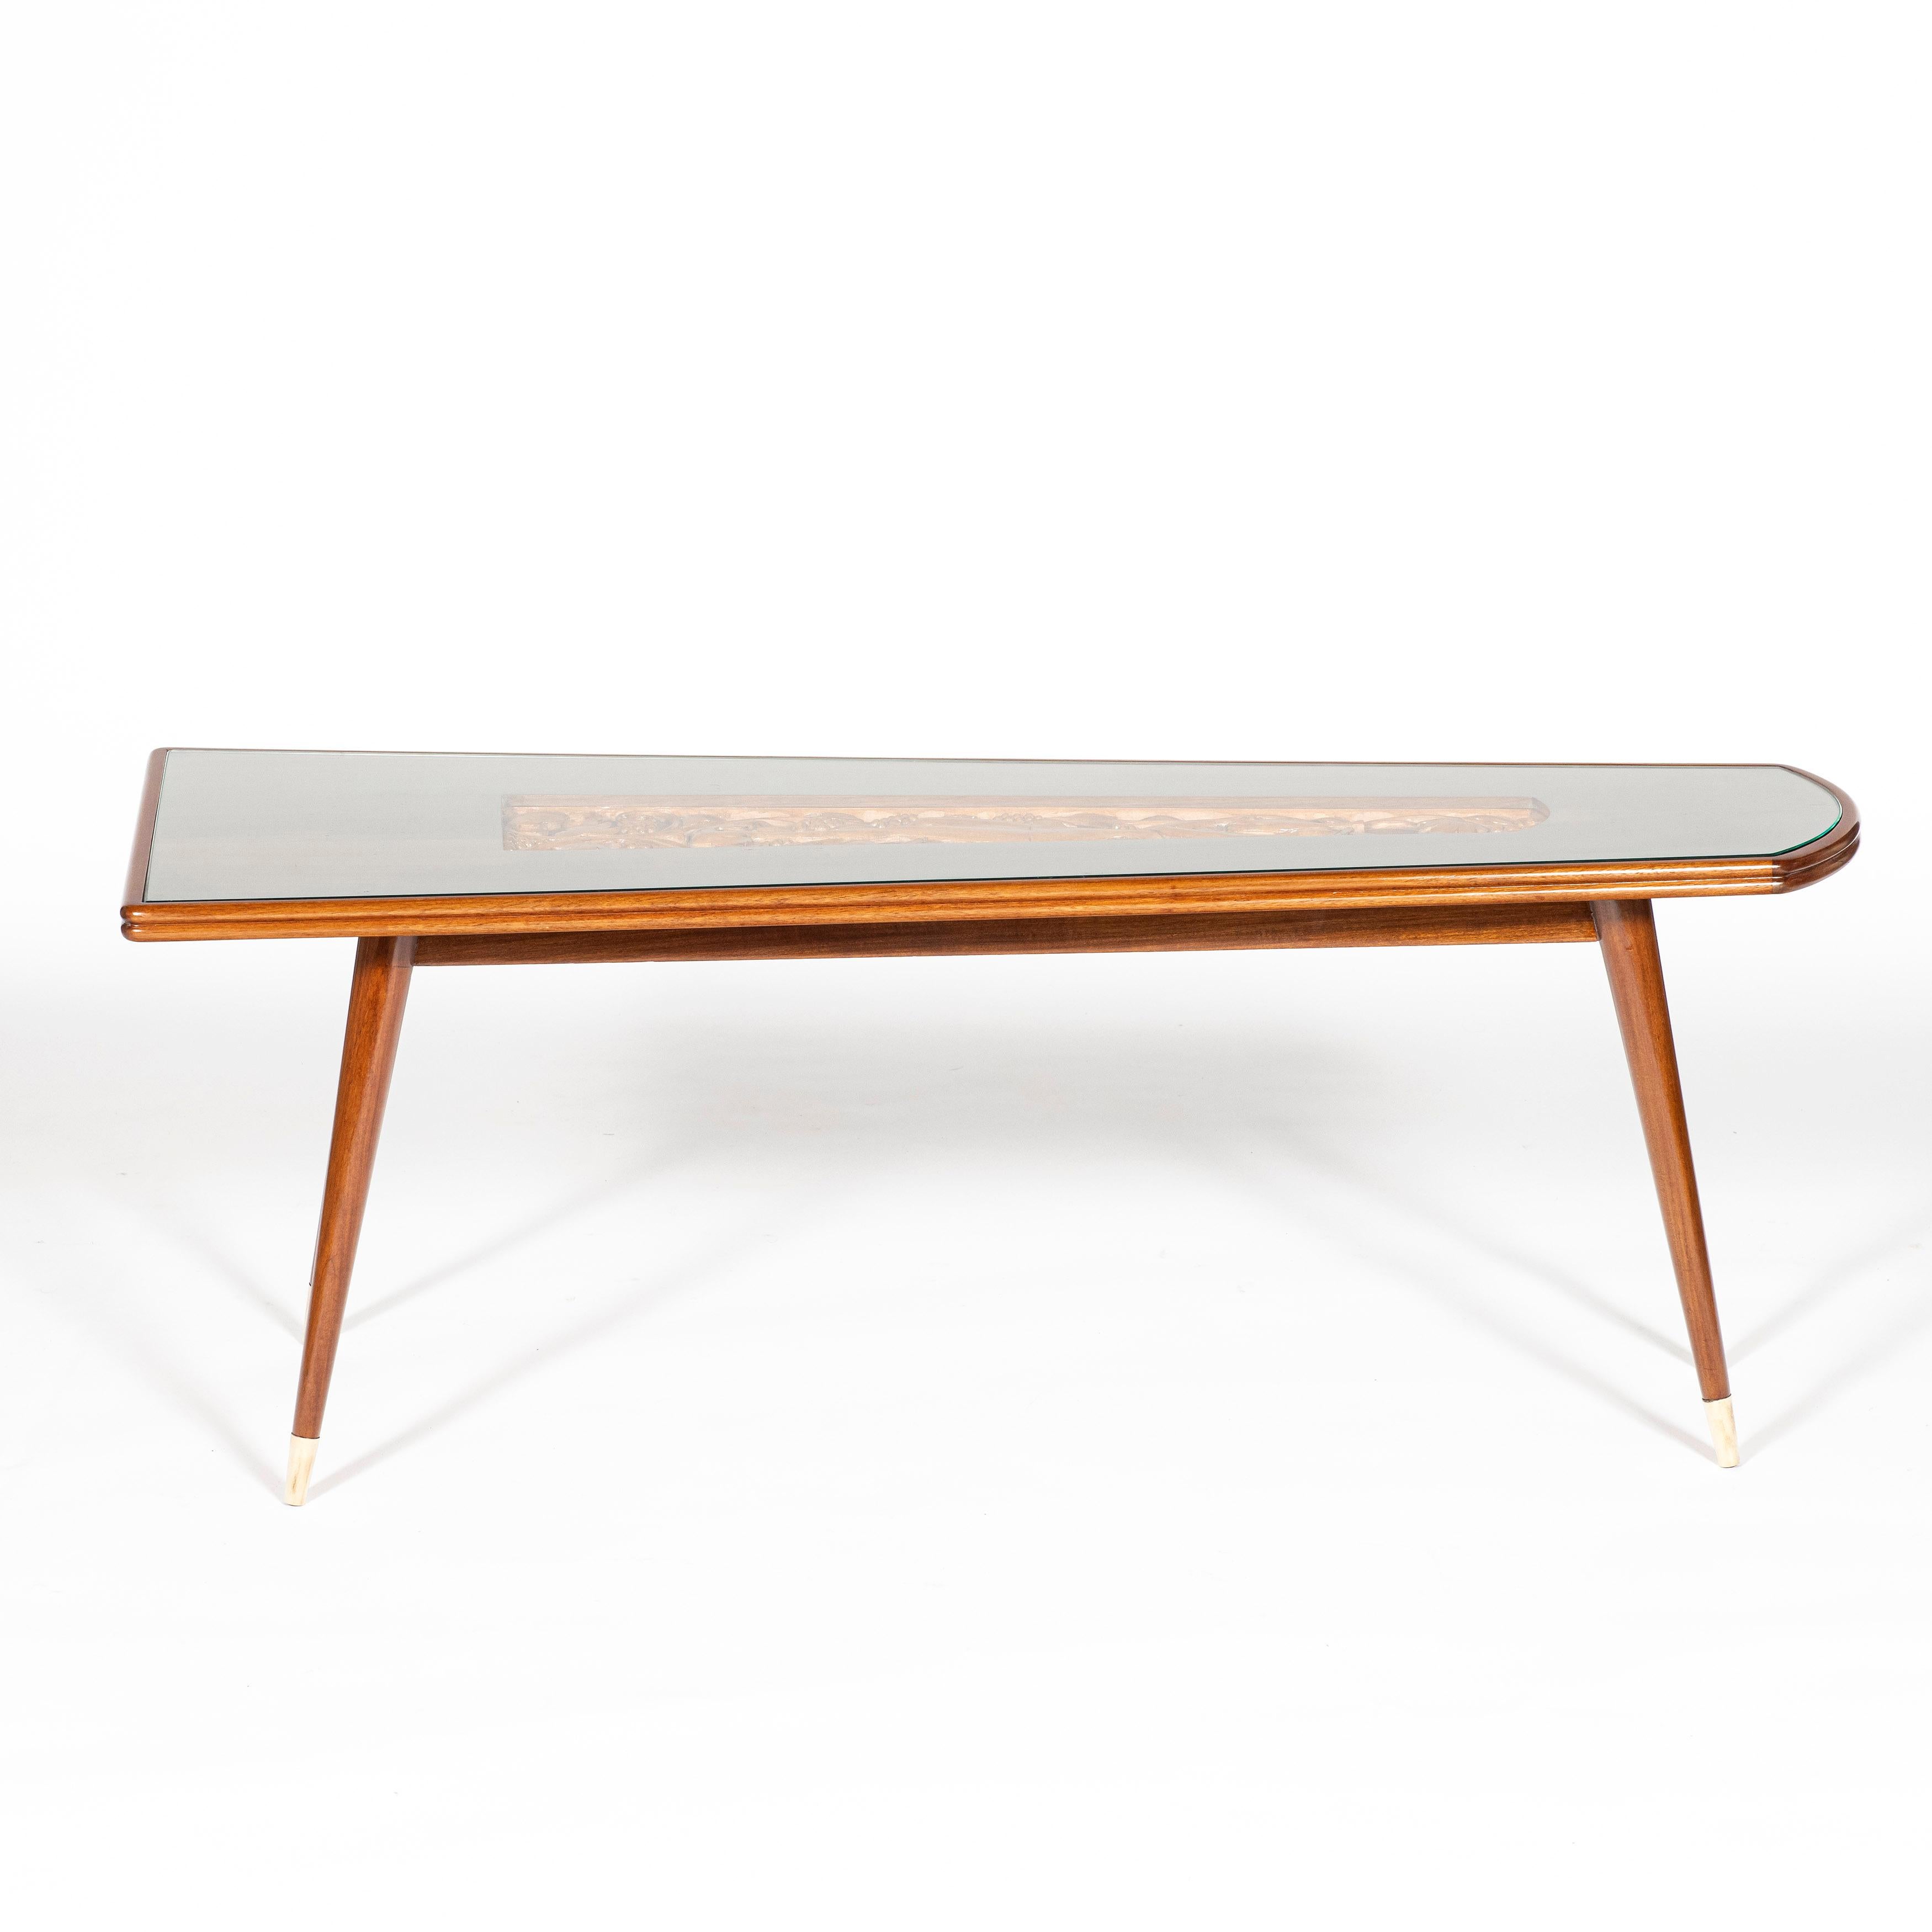 Mid-Century Modern Wood and Glass Low Table by Englander & Bonta, Argentina, Buenos Aires, c. 1950 For Sale